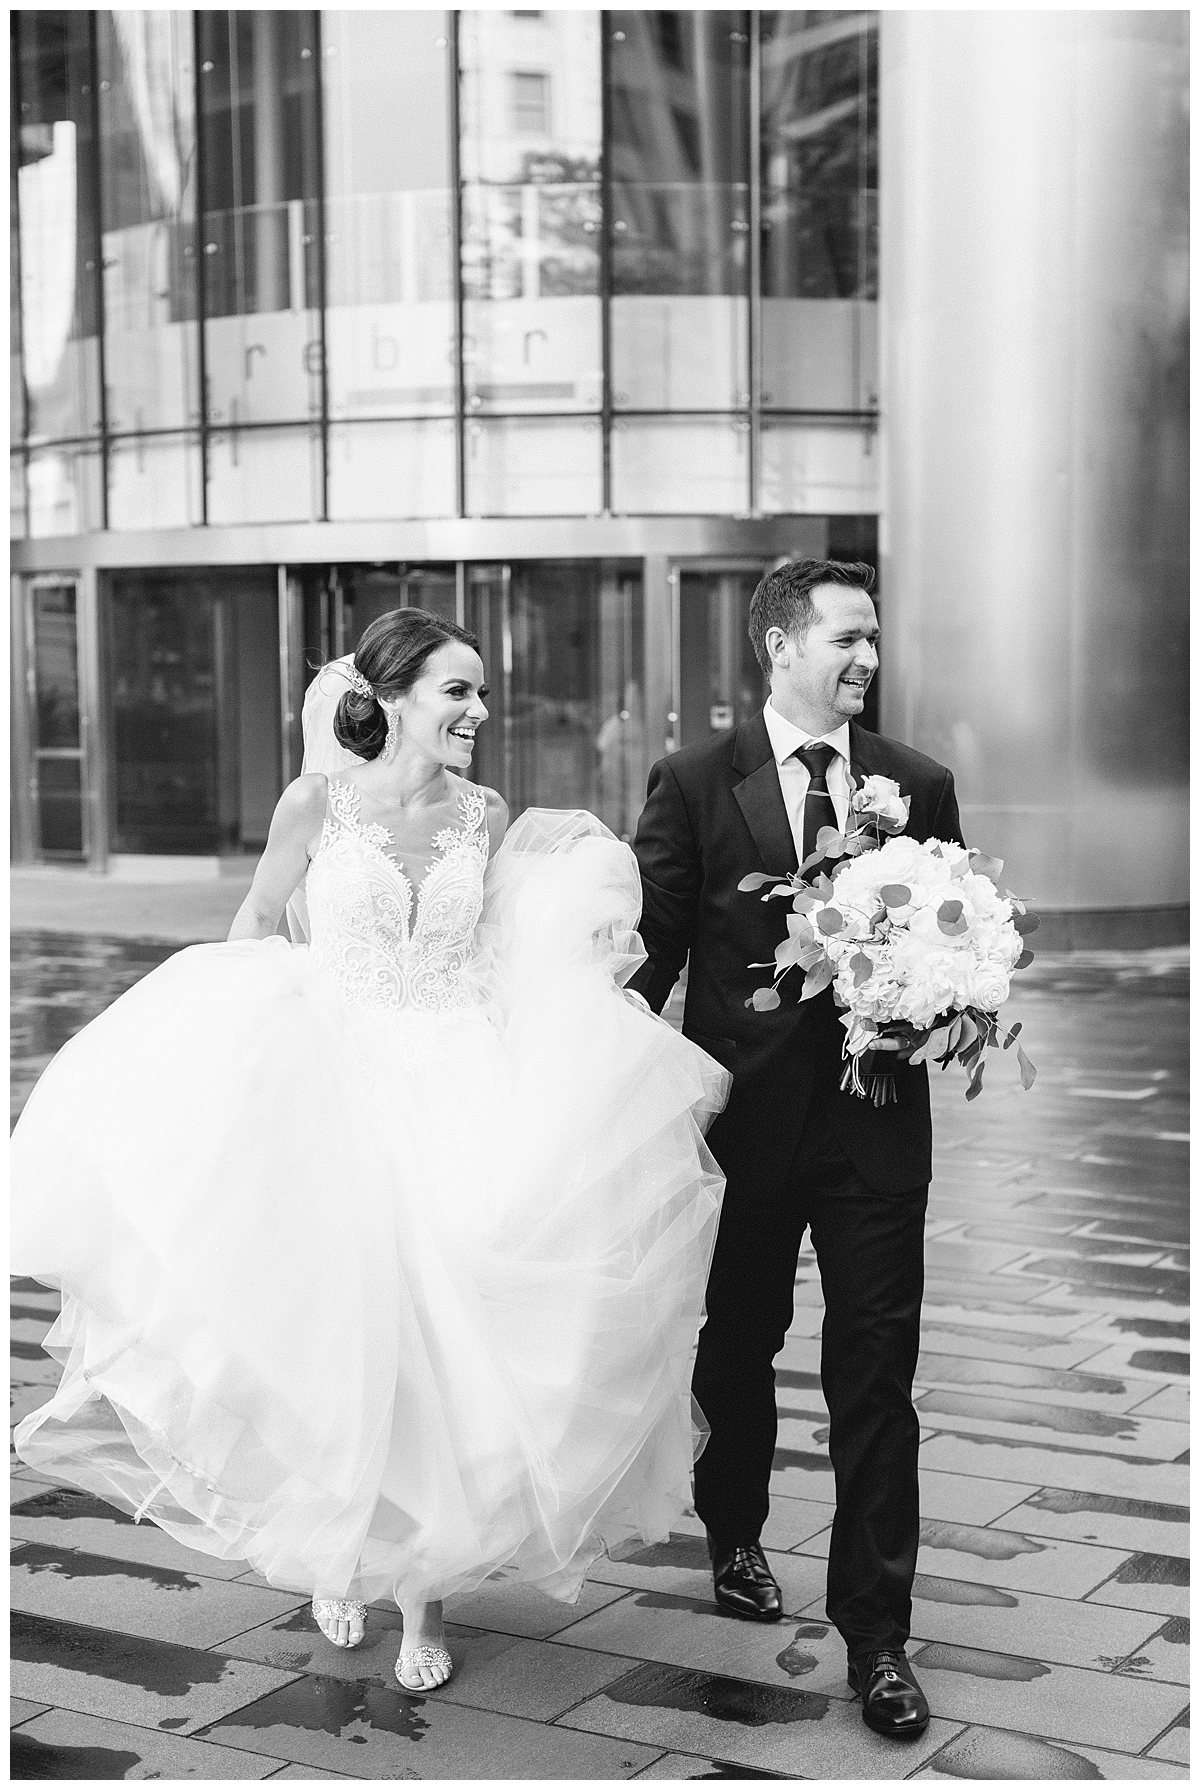 A bride and groom smiles in this black and white wedding portrait outside of the Wrigley Building in Chicago. They are dressed very formally. 